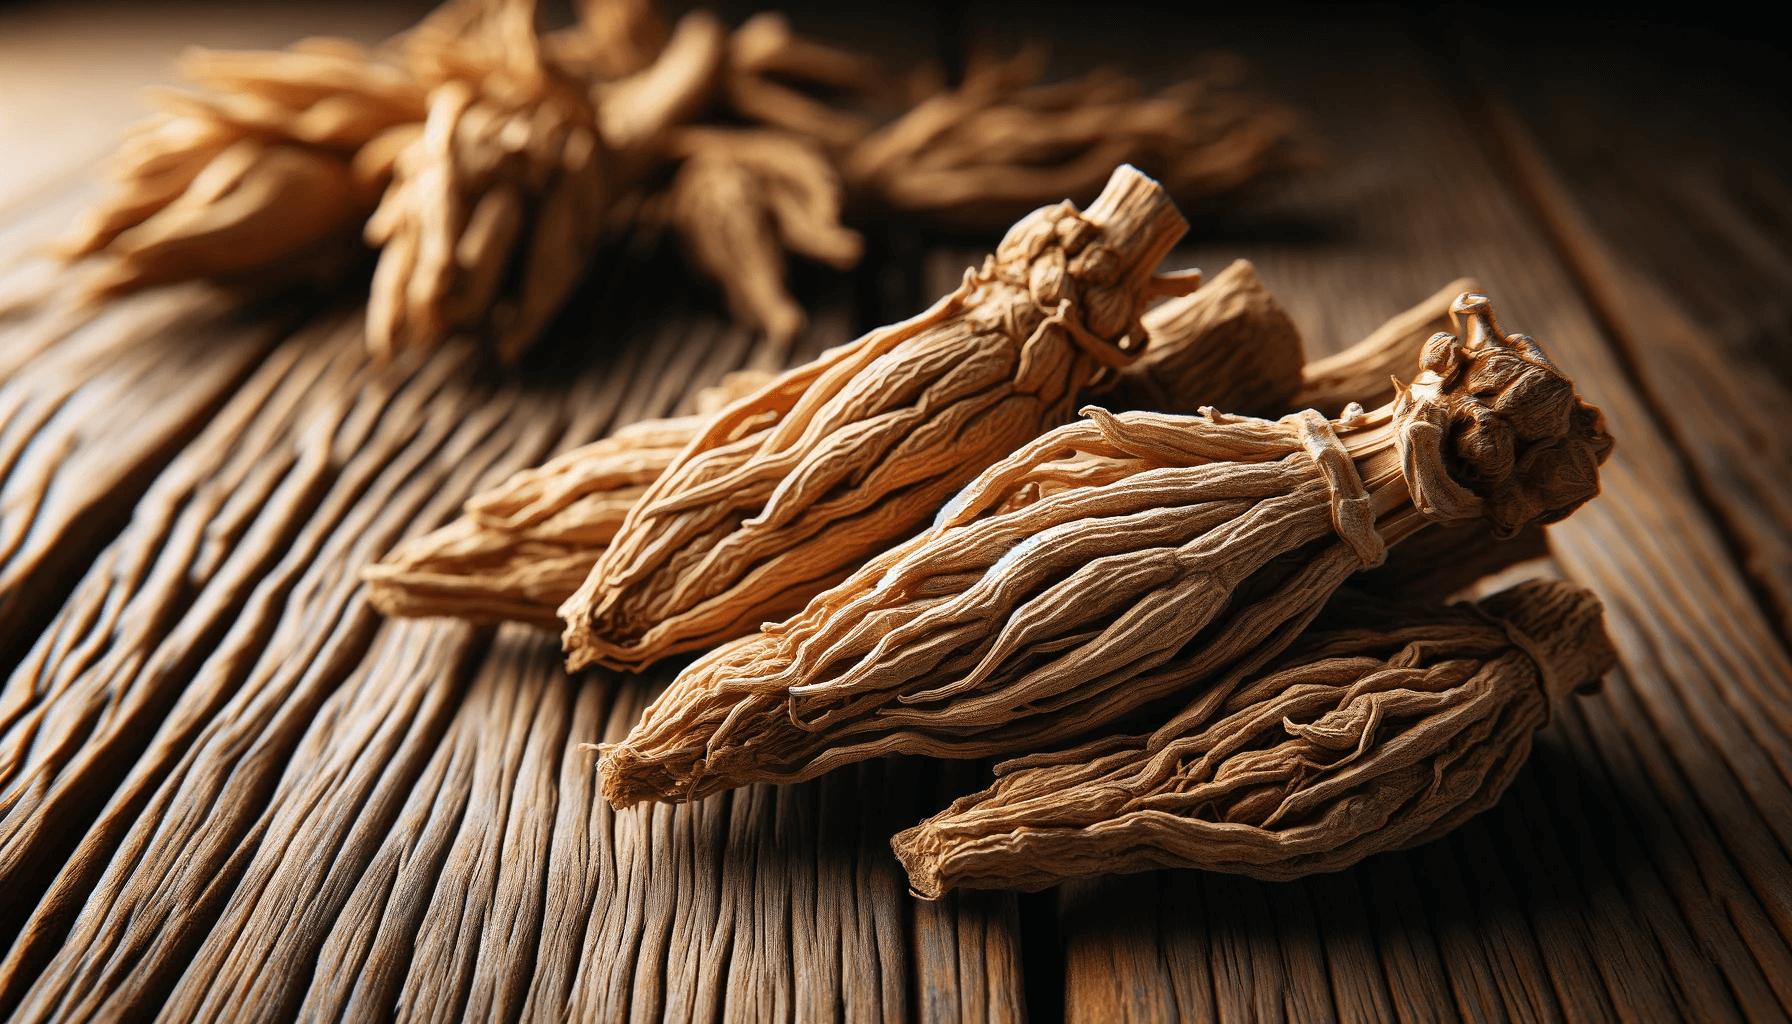 Dried Ashwagandha roots on a rustic wooden table